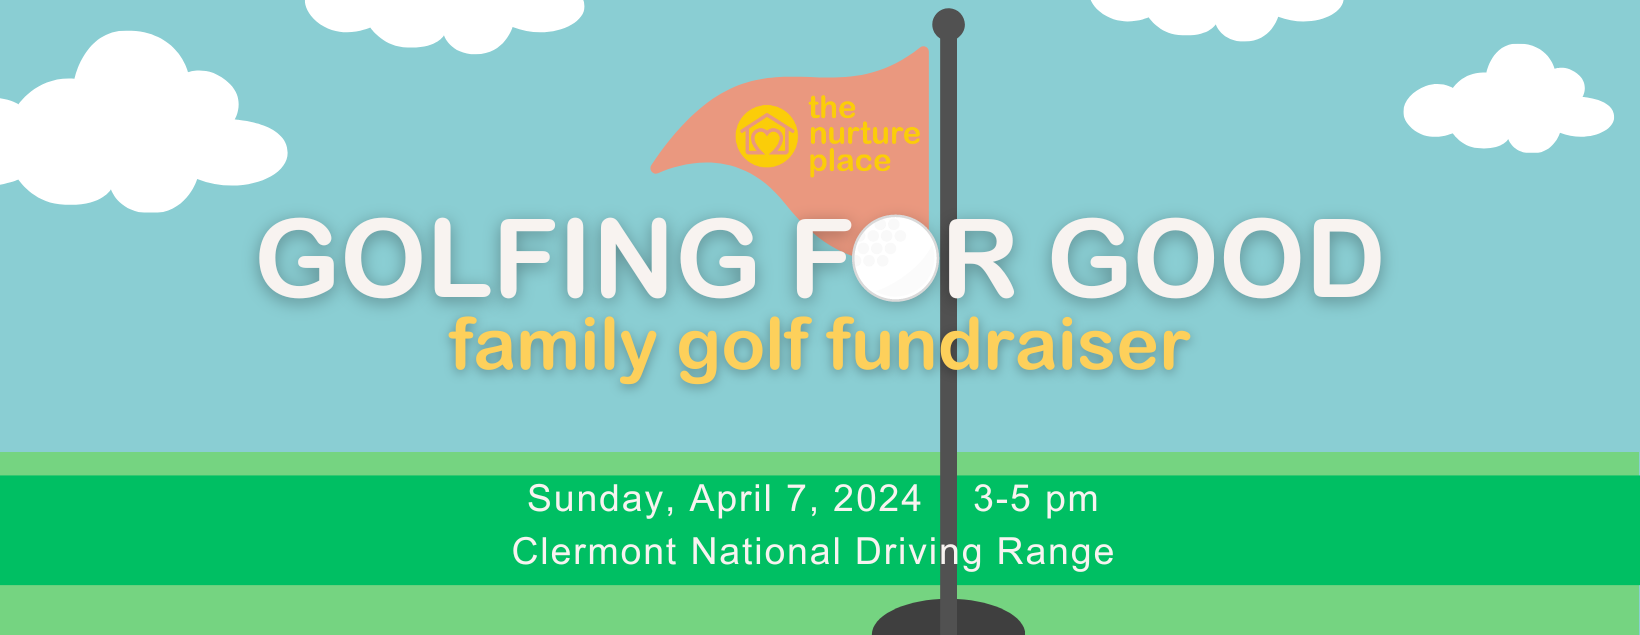 Golfing for Good at Clermont National